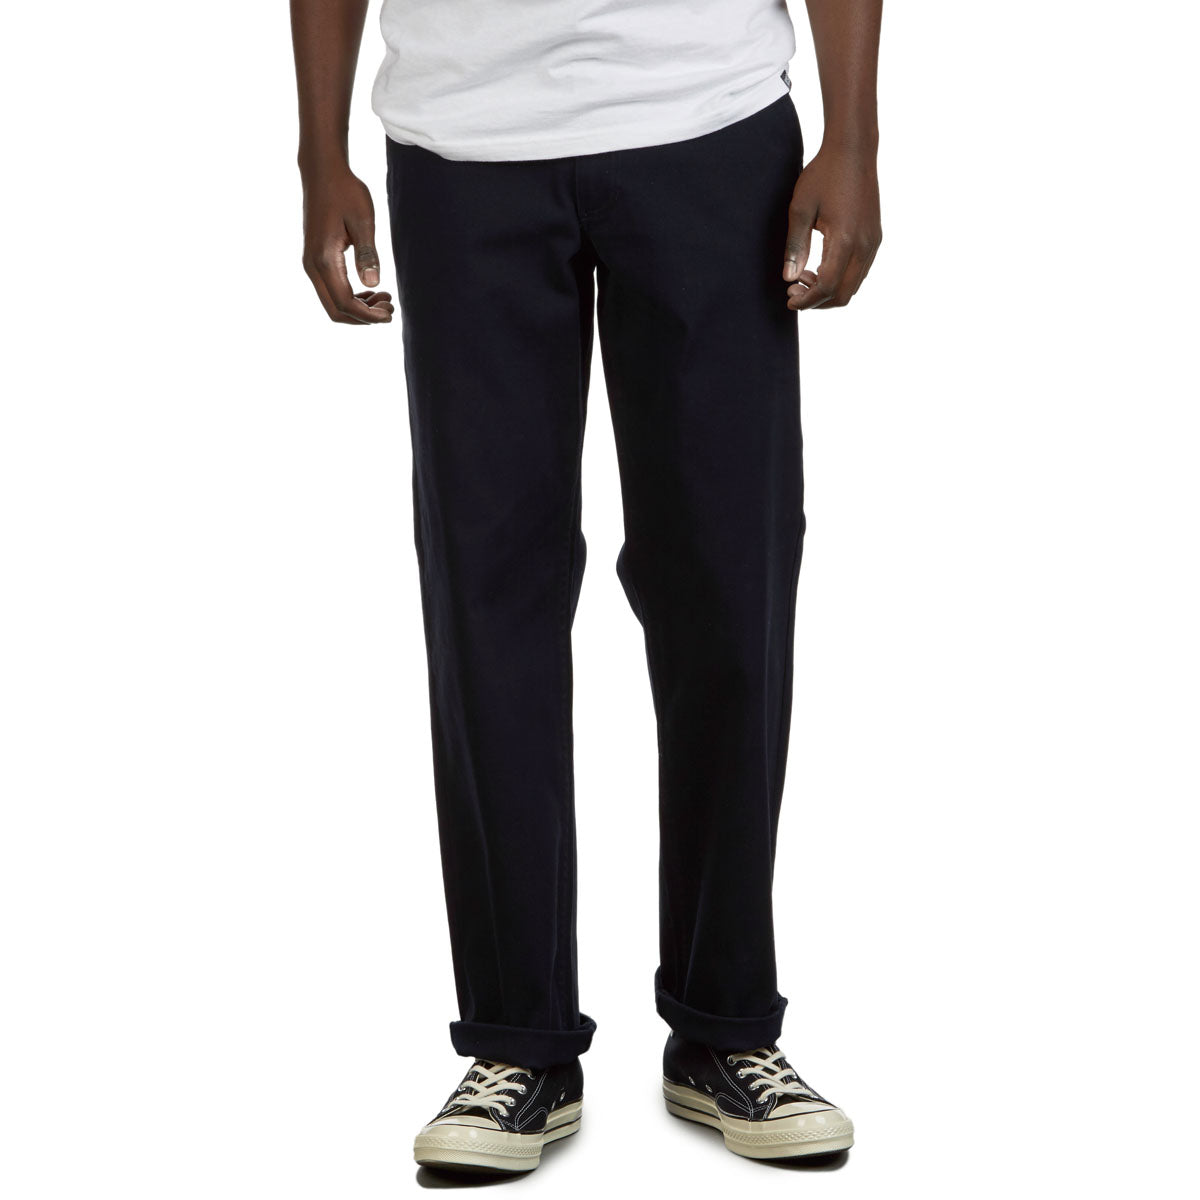 CCS Standard Plus Relaxed Chino Pants - Navy image 4